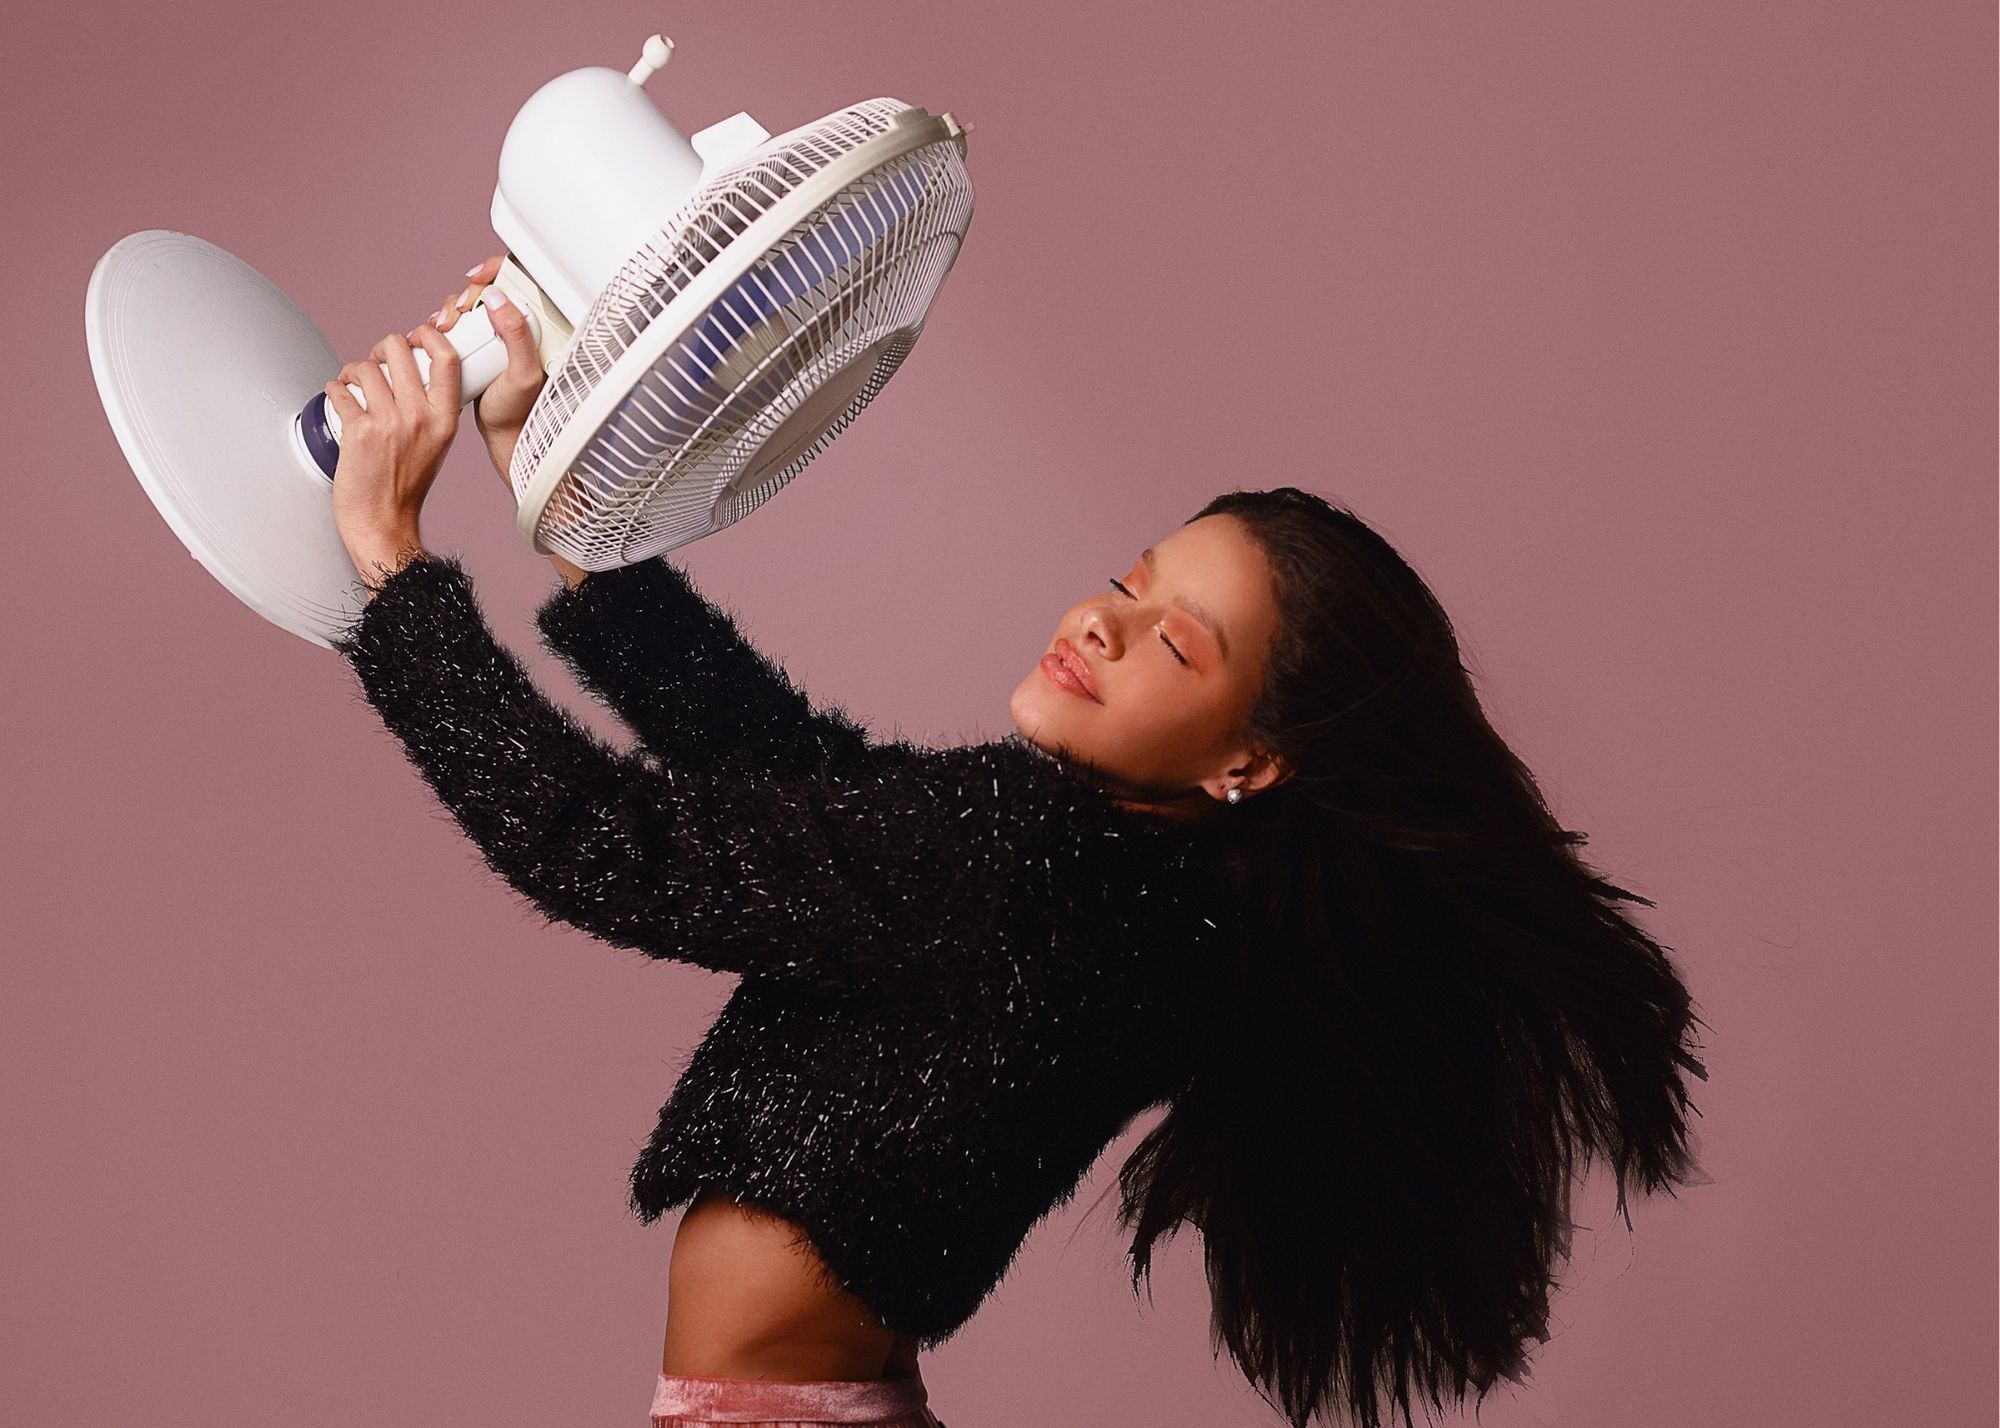 Stay cool with a fan